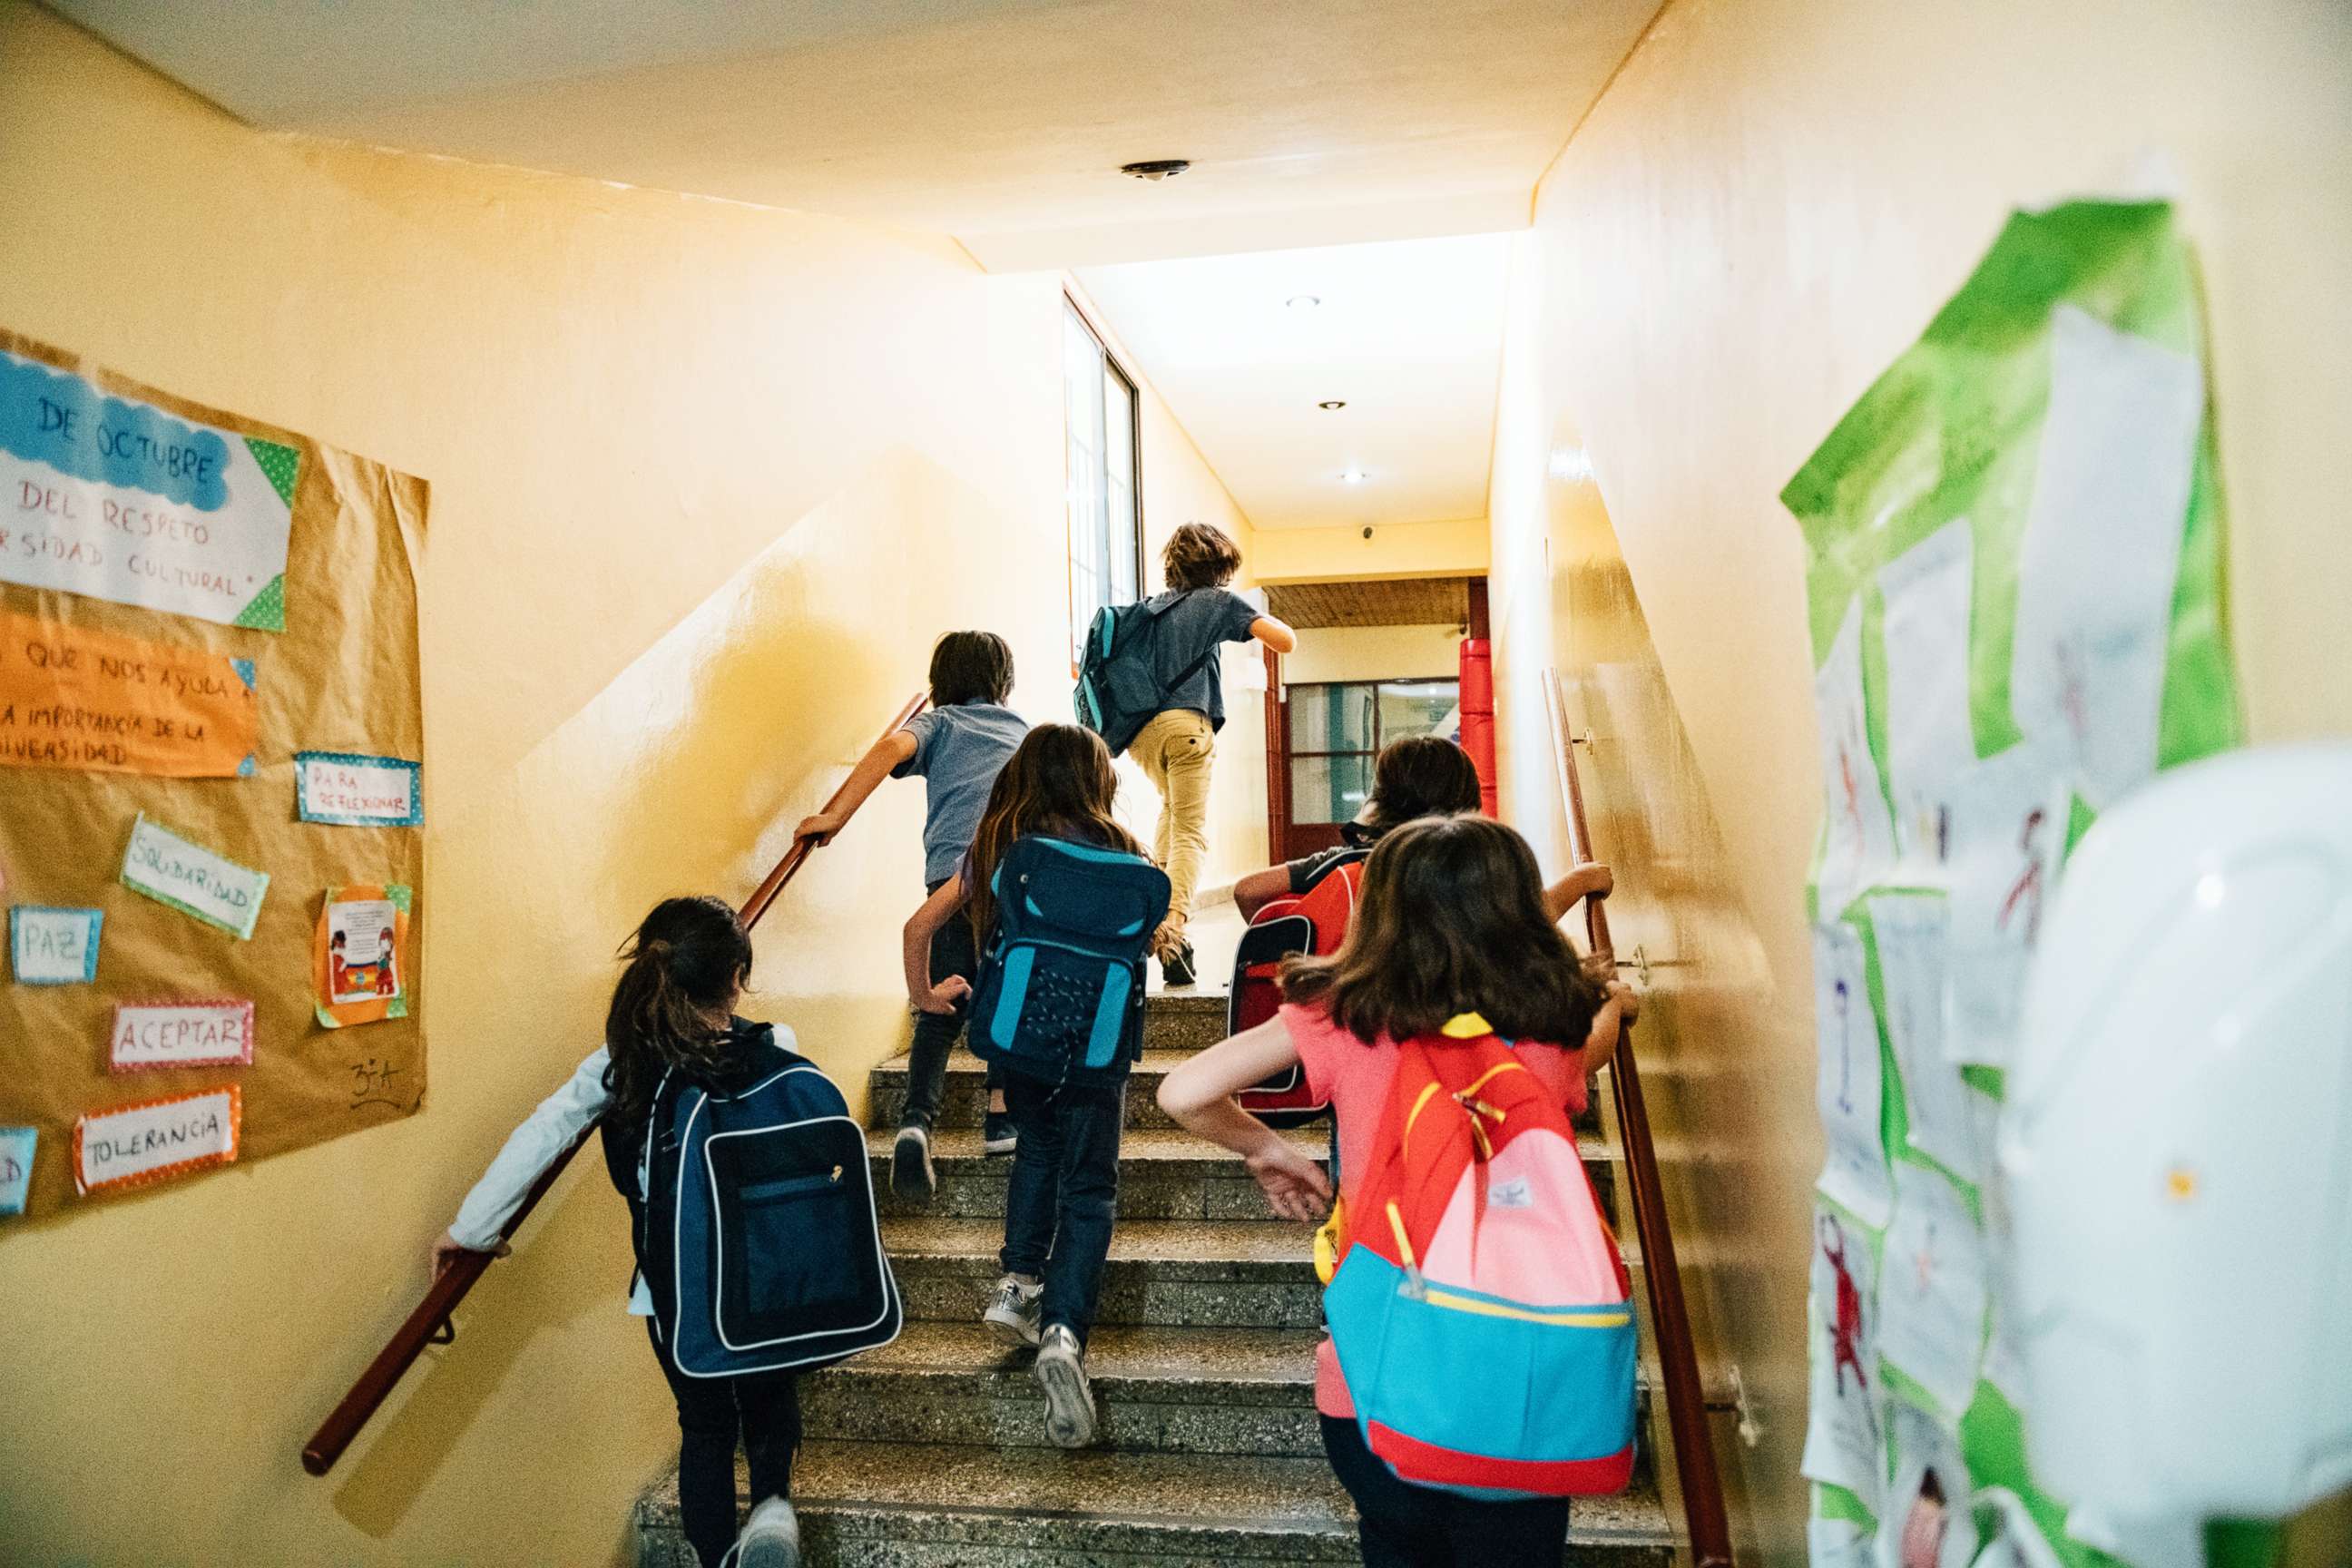 PHOTO: In this undated file photo, students walk up stairs on their way to class.